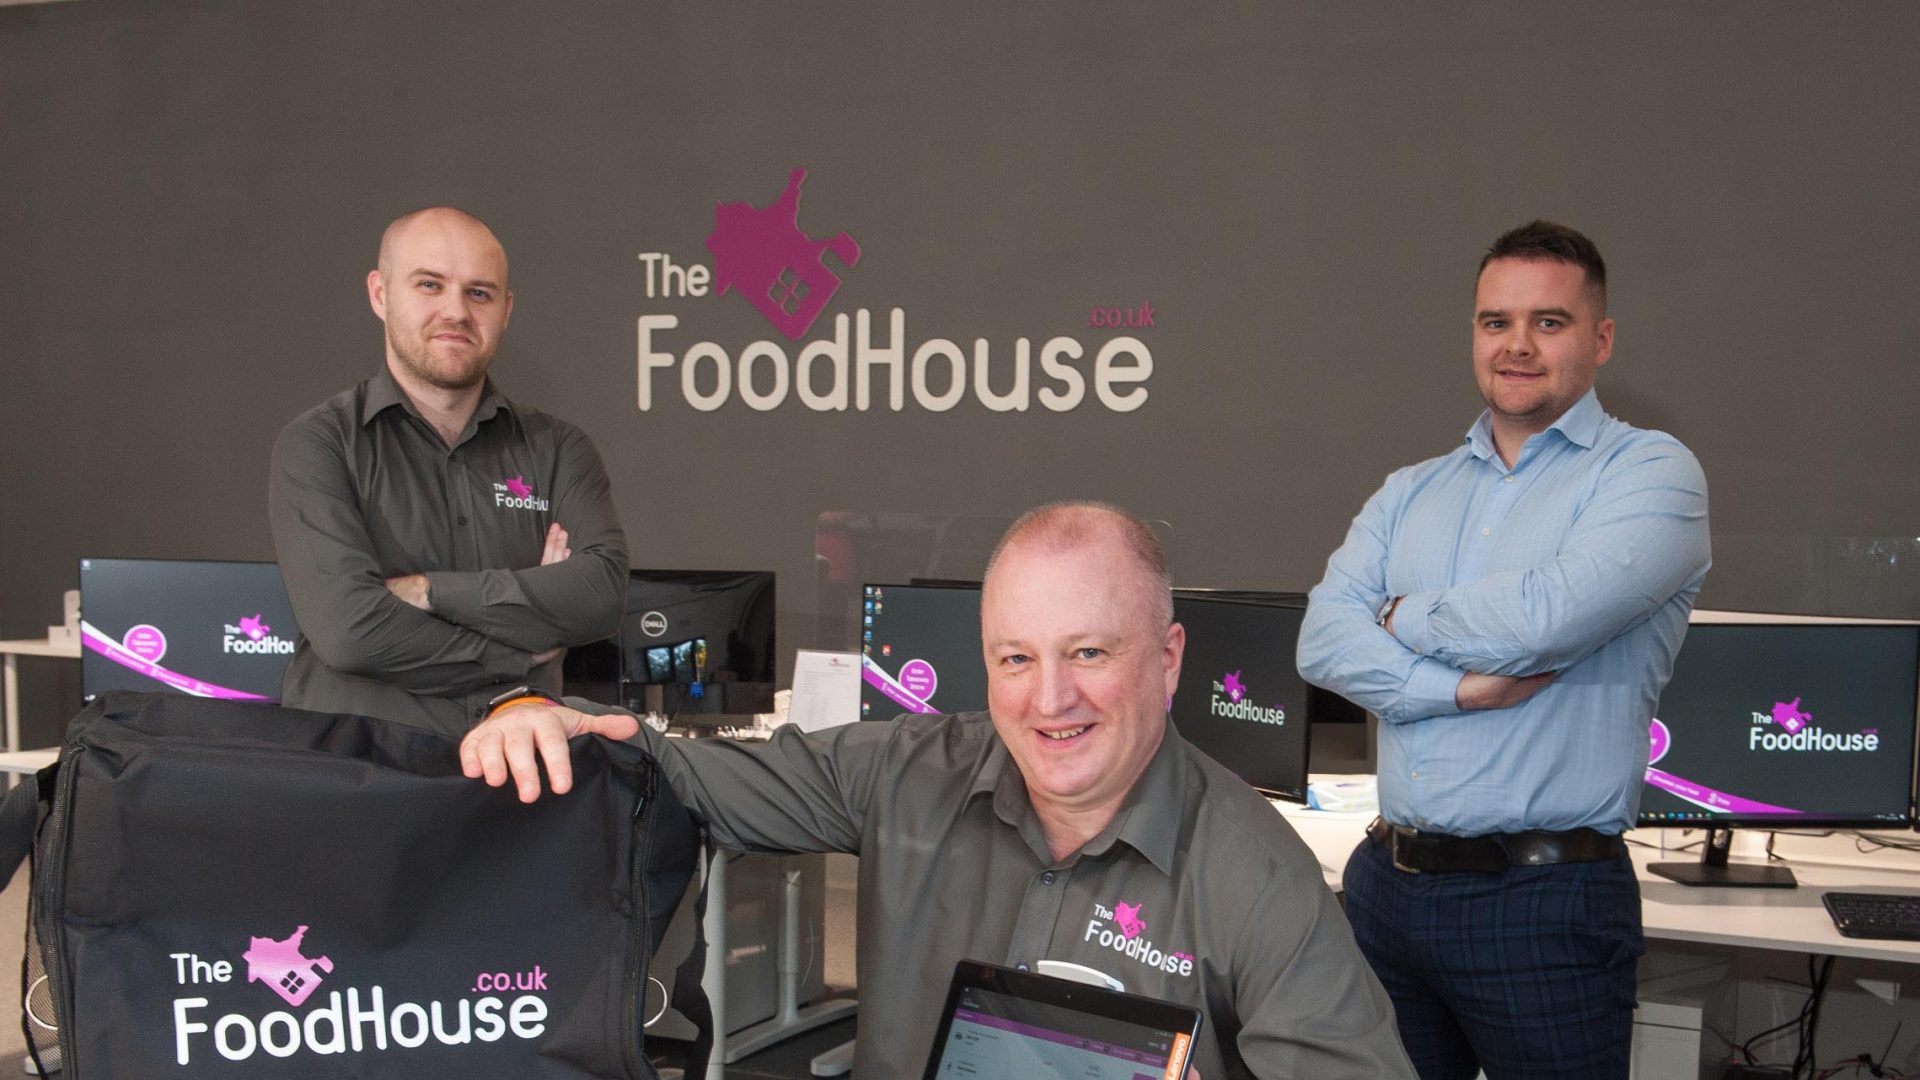 Online food delivery service prepares for growth with move to larger premises